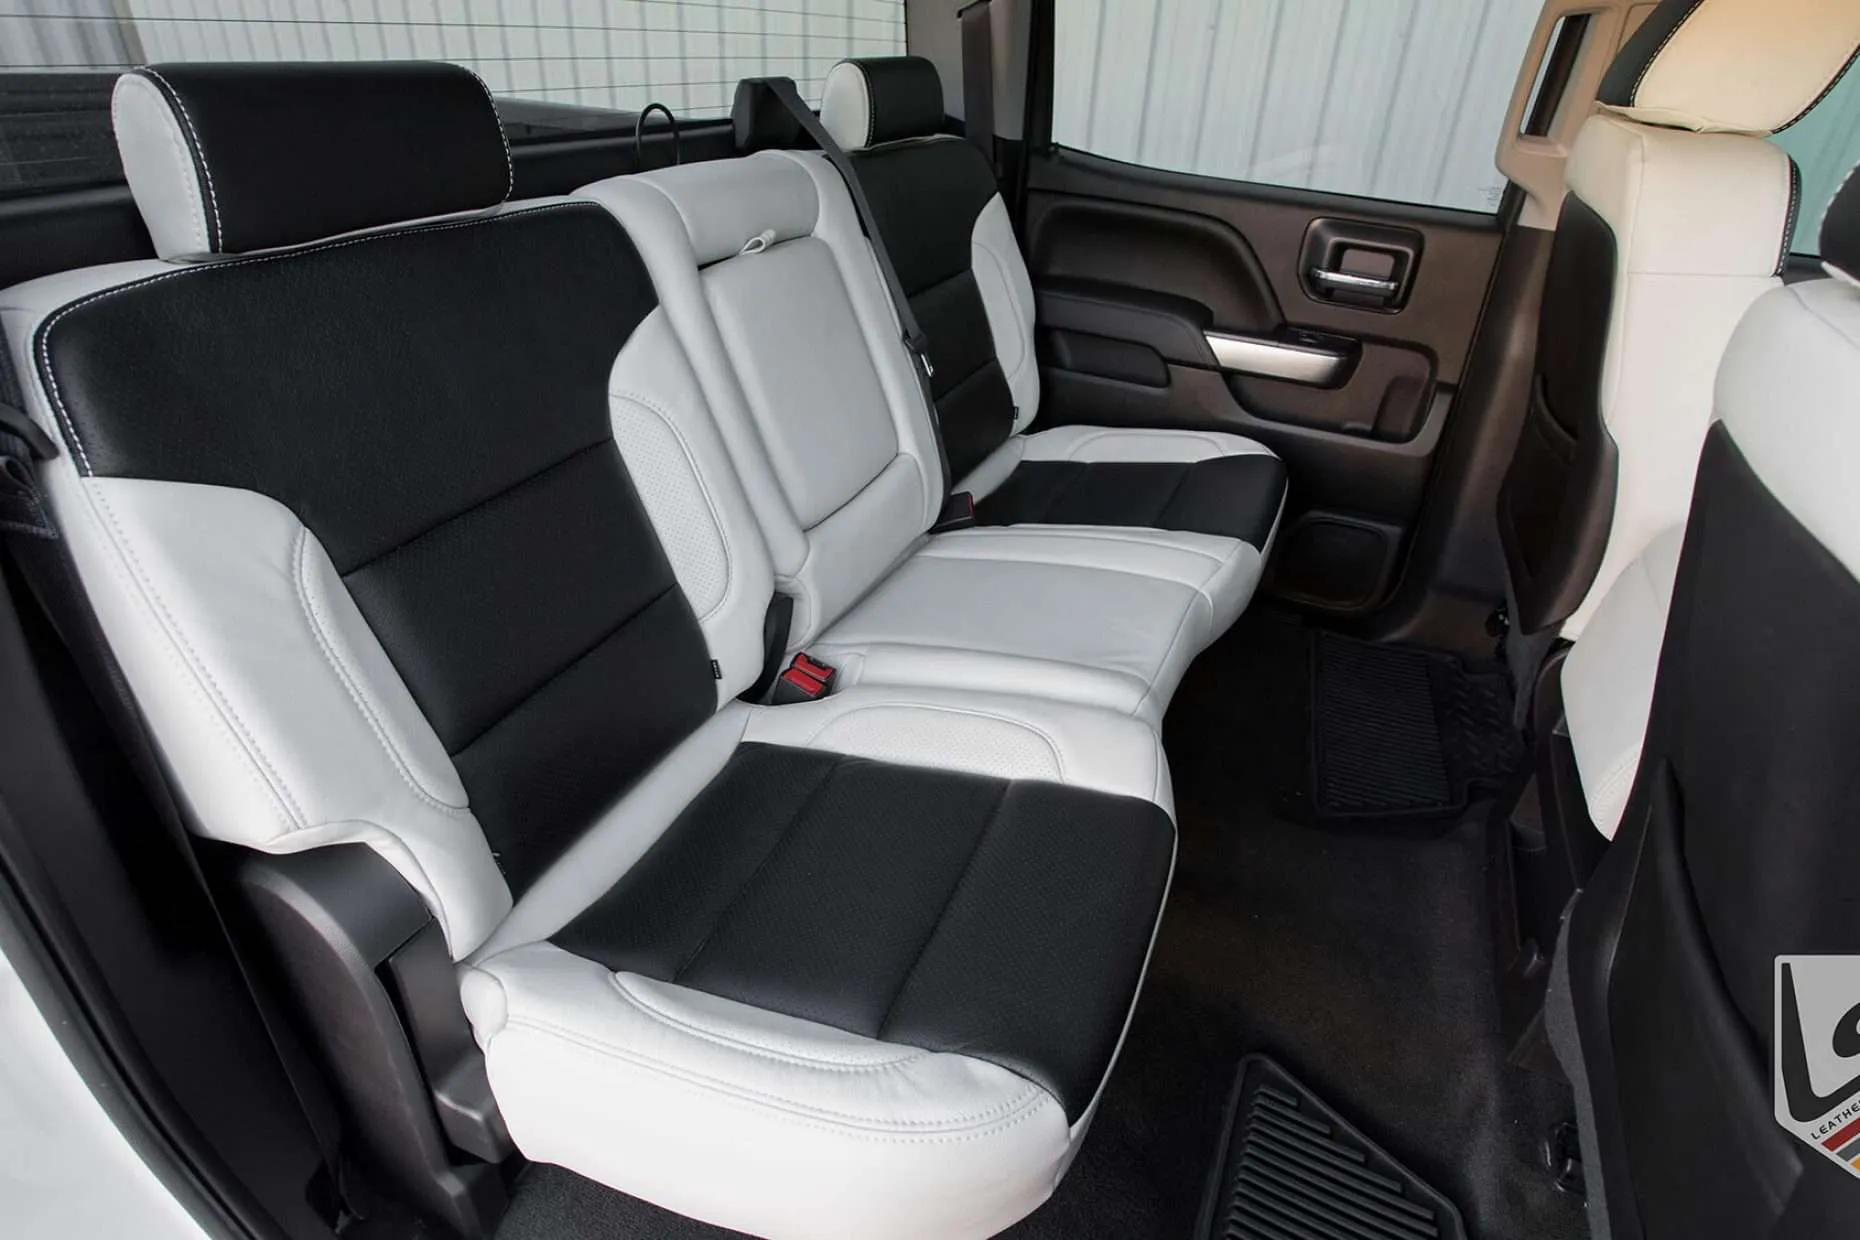 Leatherseats.com interior for Chevy Silverado - Rear seats from passenger side